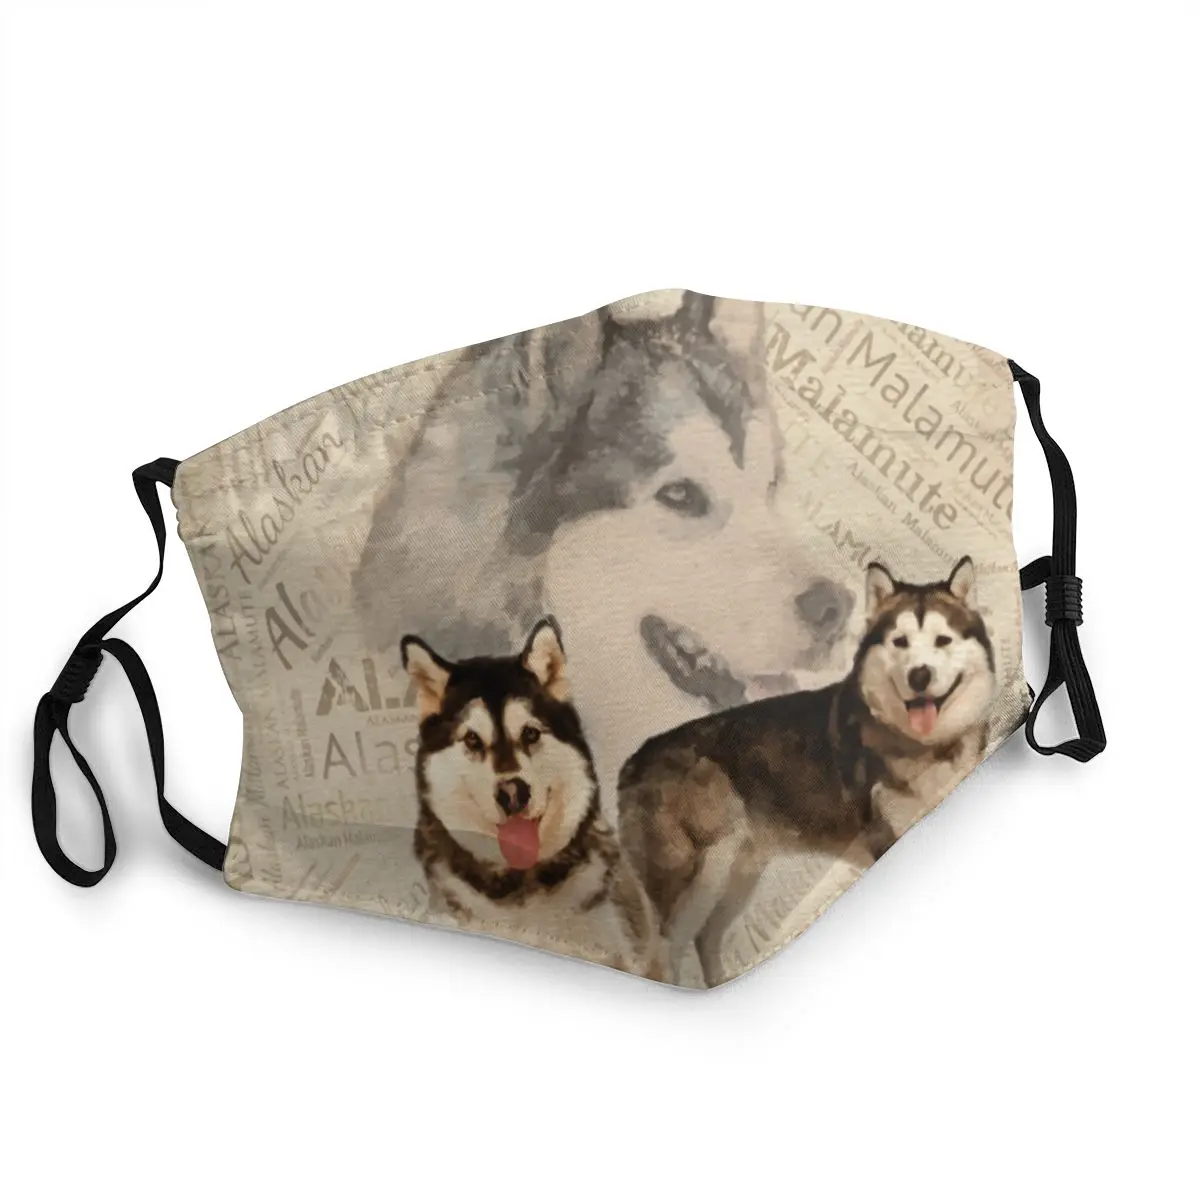 

Alaskan Malamute Collage On Word Pattern Washable Adult Face Mask Siberian Husky Dust Protection Cover Respirator Mouth Muffle